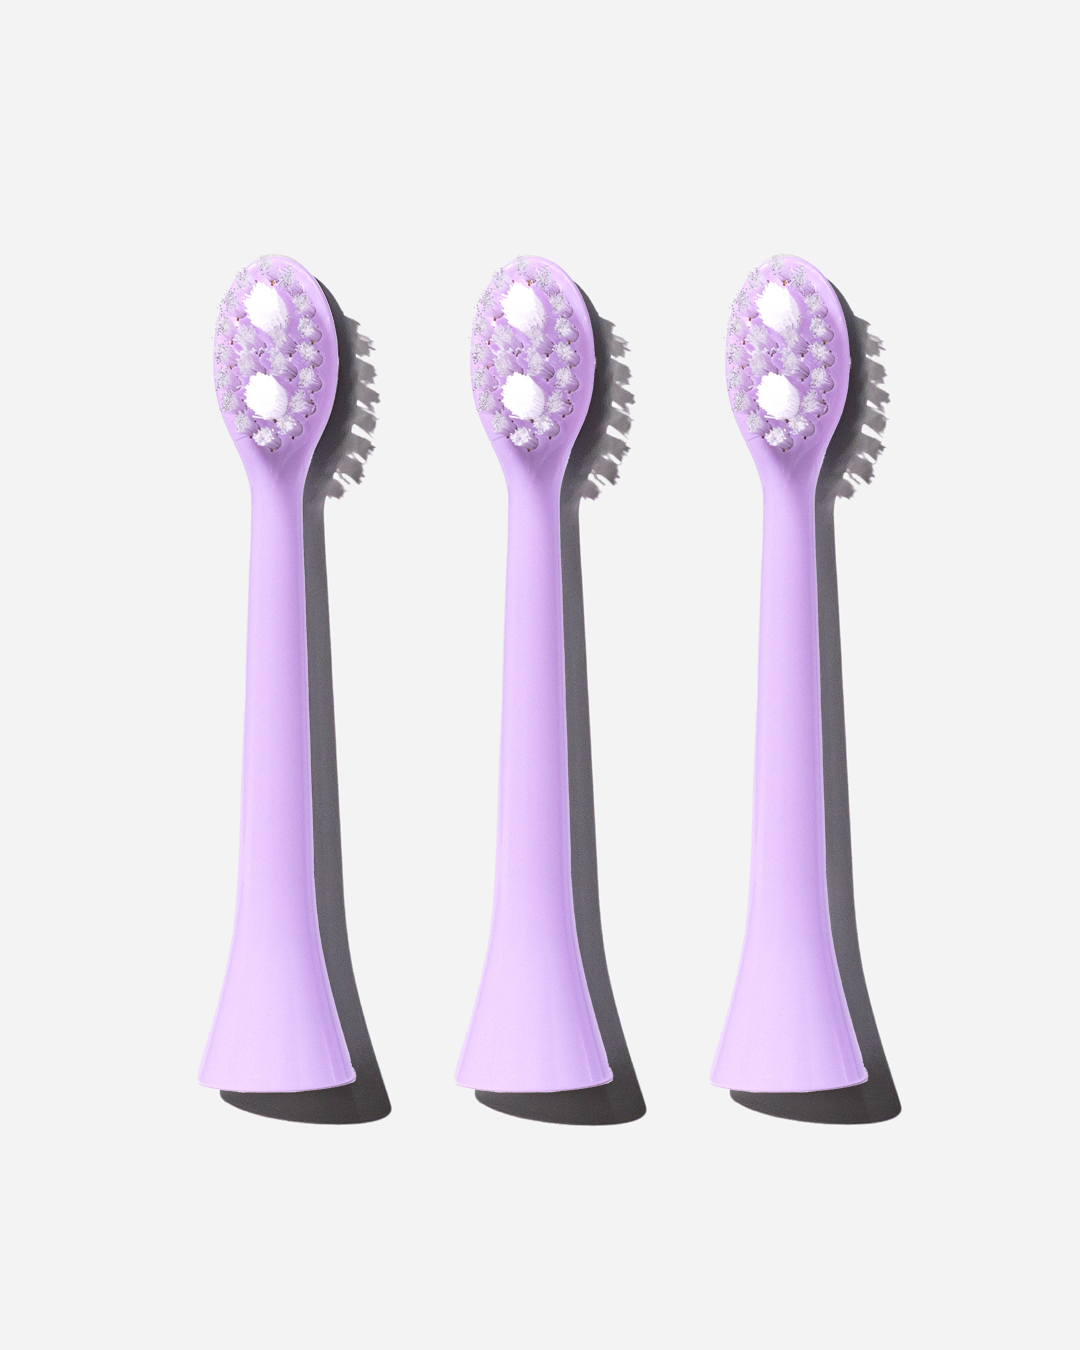 Sonic Toothbrush Replacement Heads - Morning Lilac